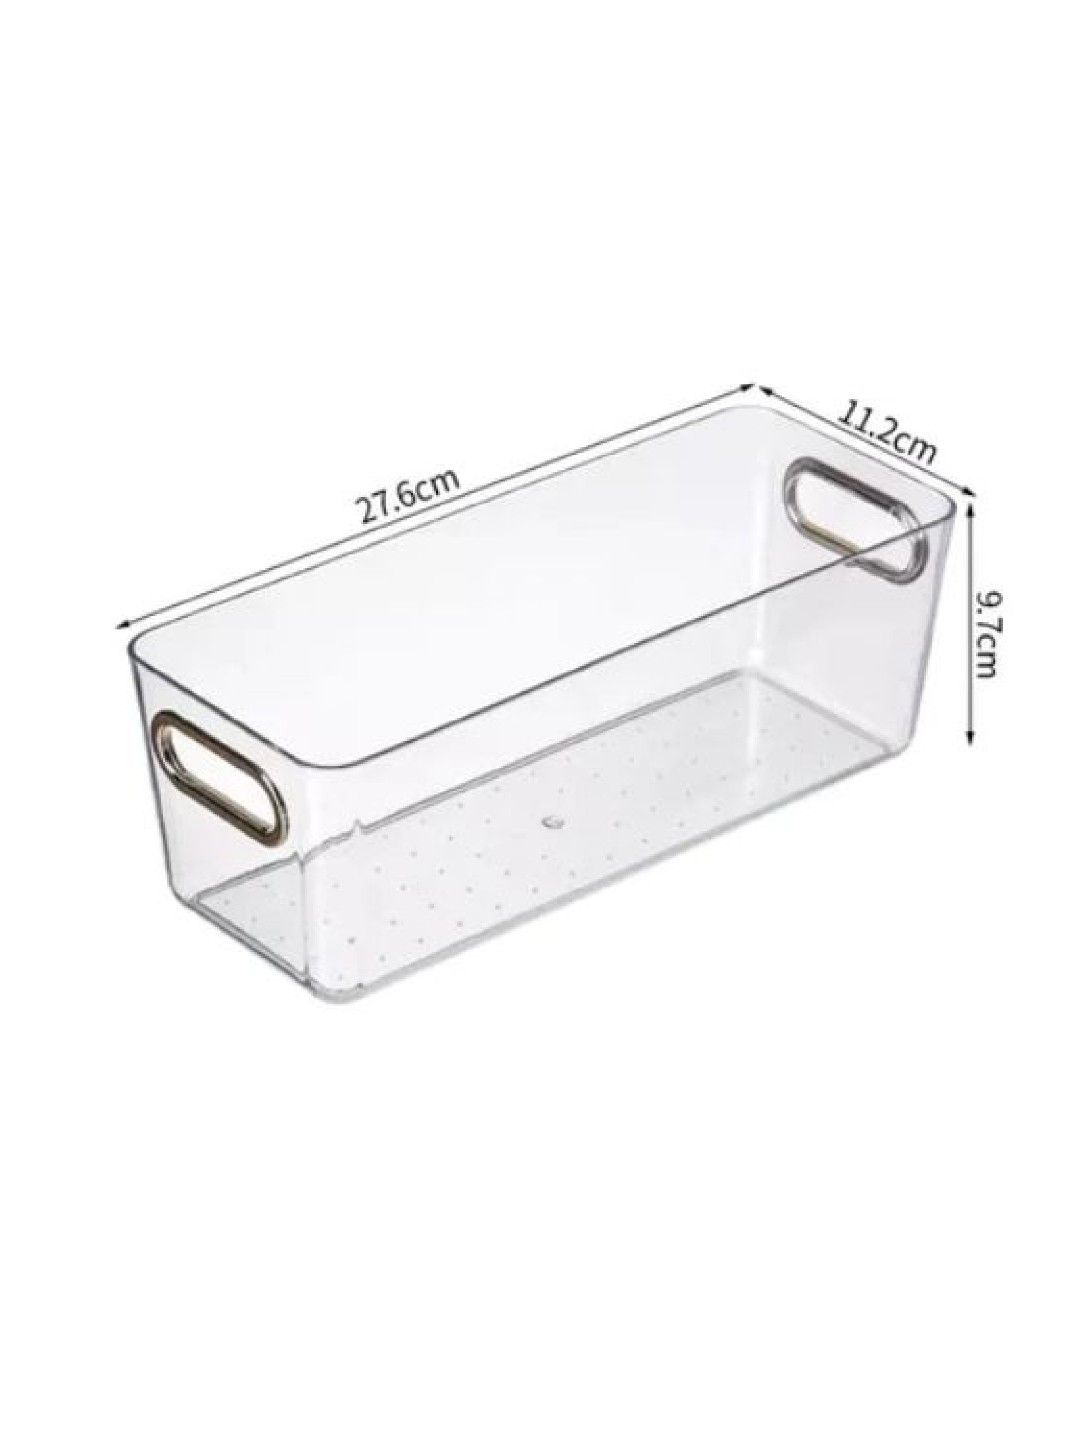 Mamei Acrylic Transparent Storage Organizer Box with Hold handles - Small